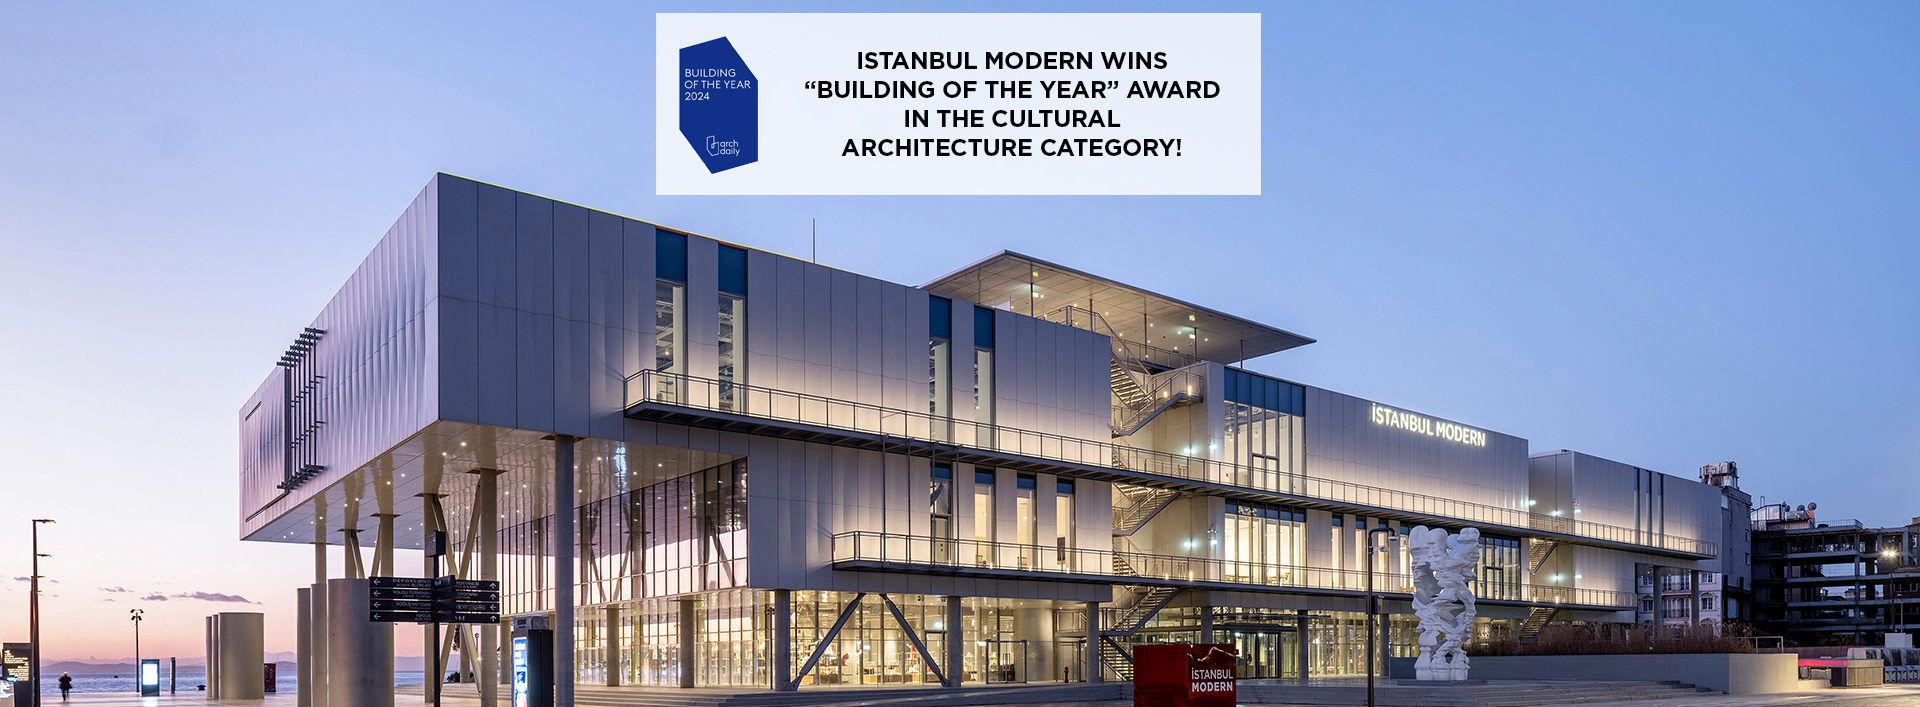 Another award for Istanbul Modern’s new museum building…